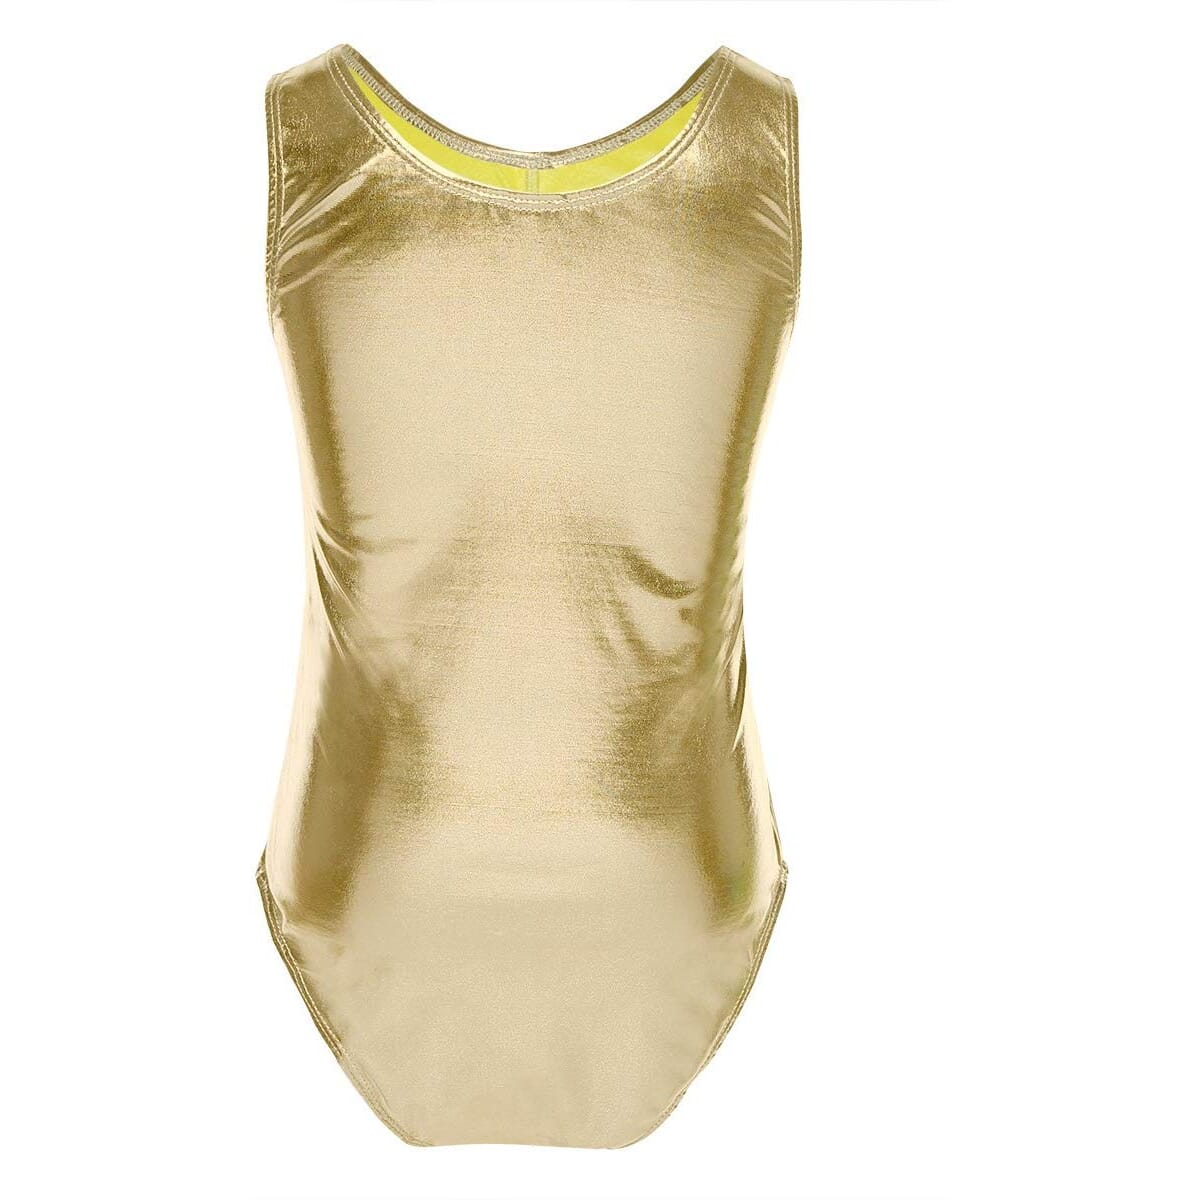 Hire Metallic Gold Leotard from Costume Source | Modern and Tap dance ...